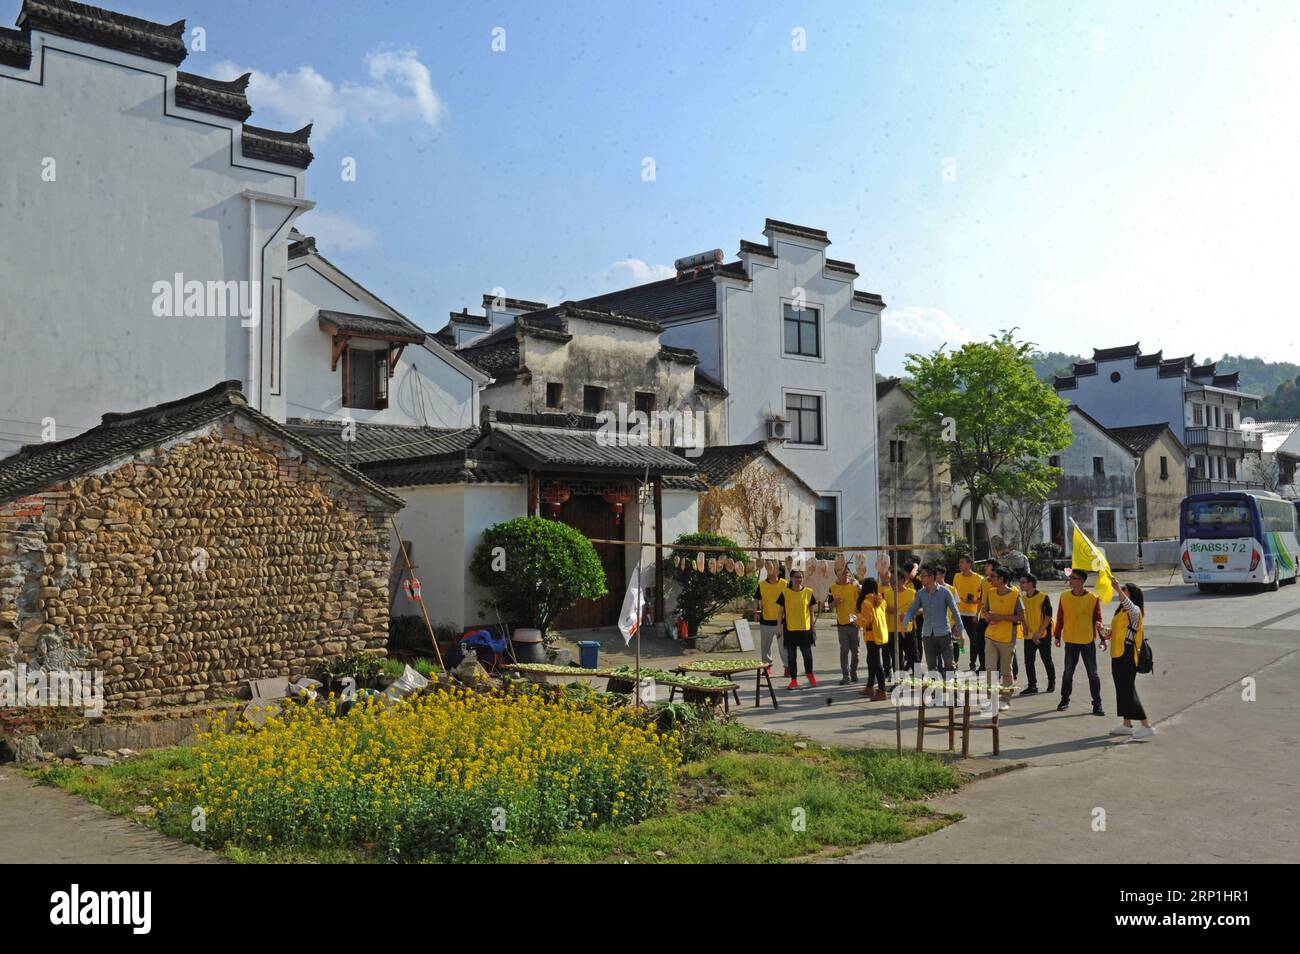 (180708) -- ANJI, July 8, 2018 -- Tourists visit Dipu Village, a AAA scenic area in Tonglu County, east China s Zhejiang Province, March 31, 2018. Many villages in Zhejiang have been built into tourist destinations in line with scenic areas. ) (zyd) CHINA-ZHEJIANG-VILLAGES-TOURISM (CN) TanxJin PUBLICATIONxNOTxINxCHN Stock Photo